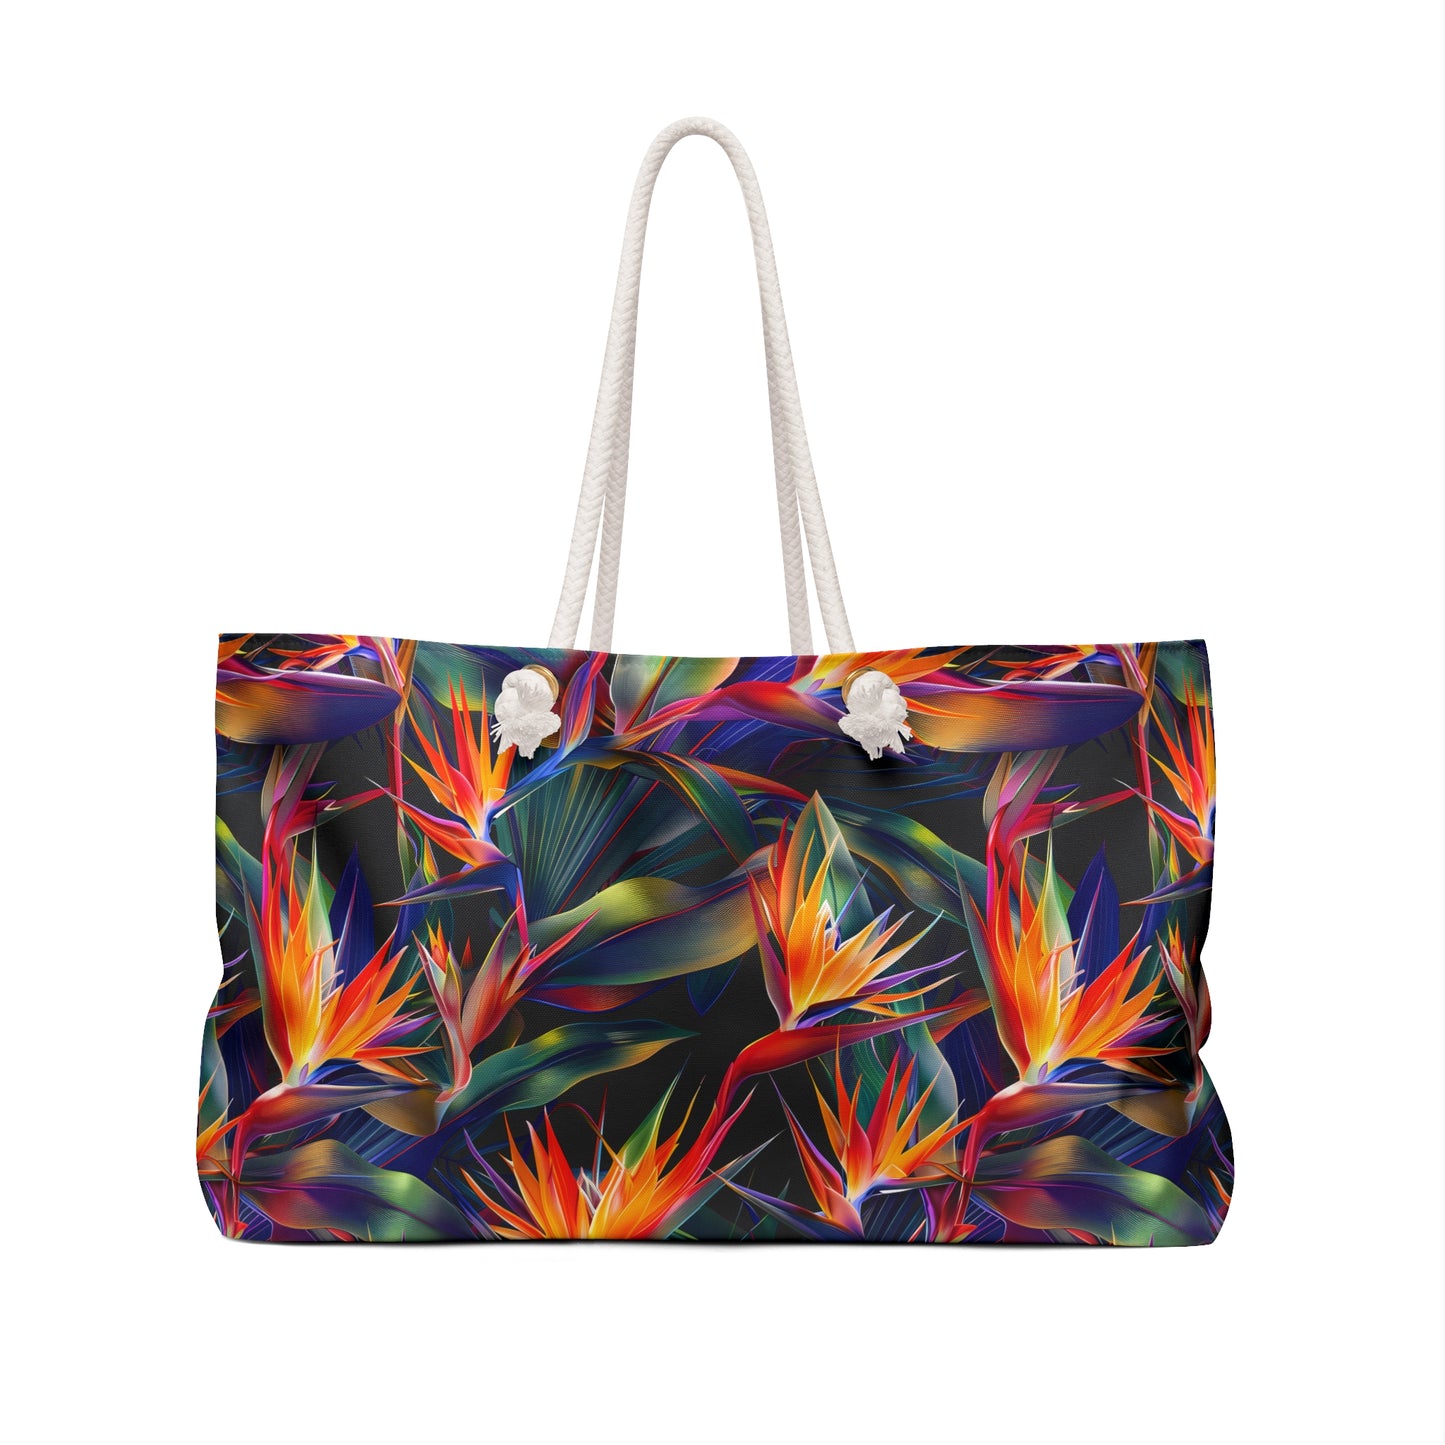 Deluxe Tropics Tote & Beach Bag with Birds of Paradise Design (24" × 13" x 5.5")